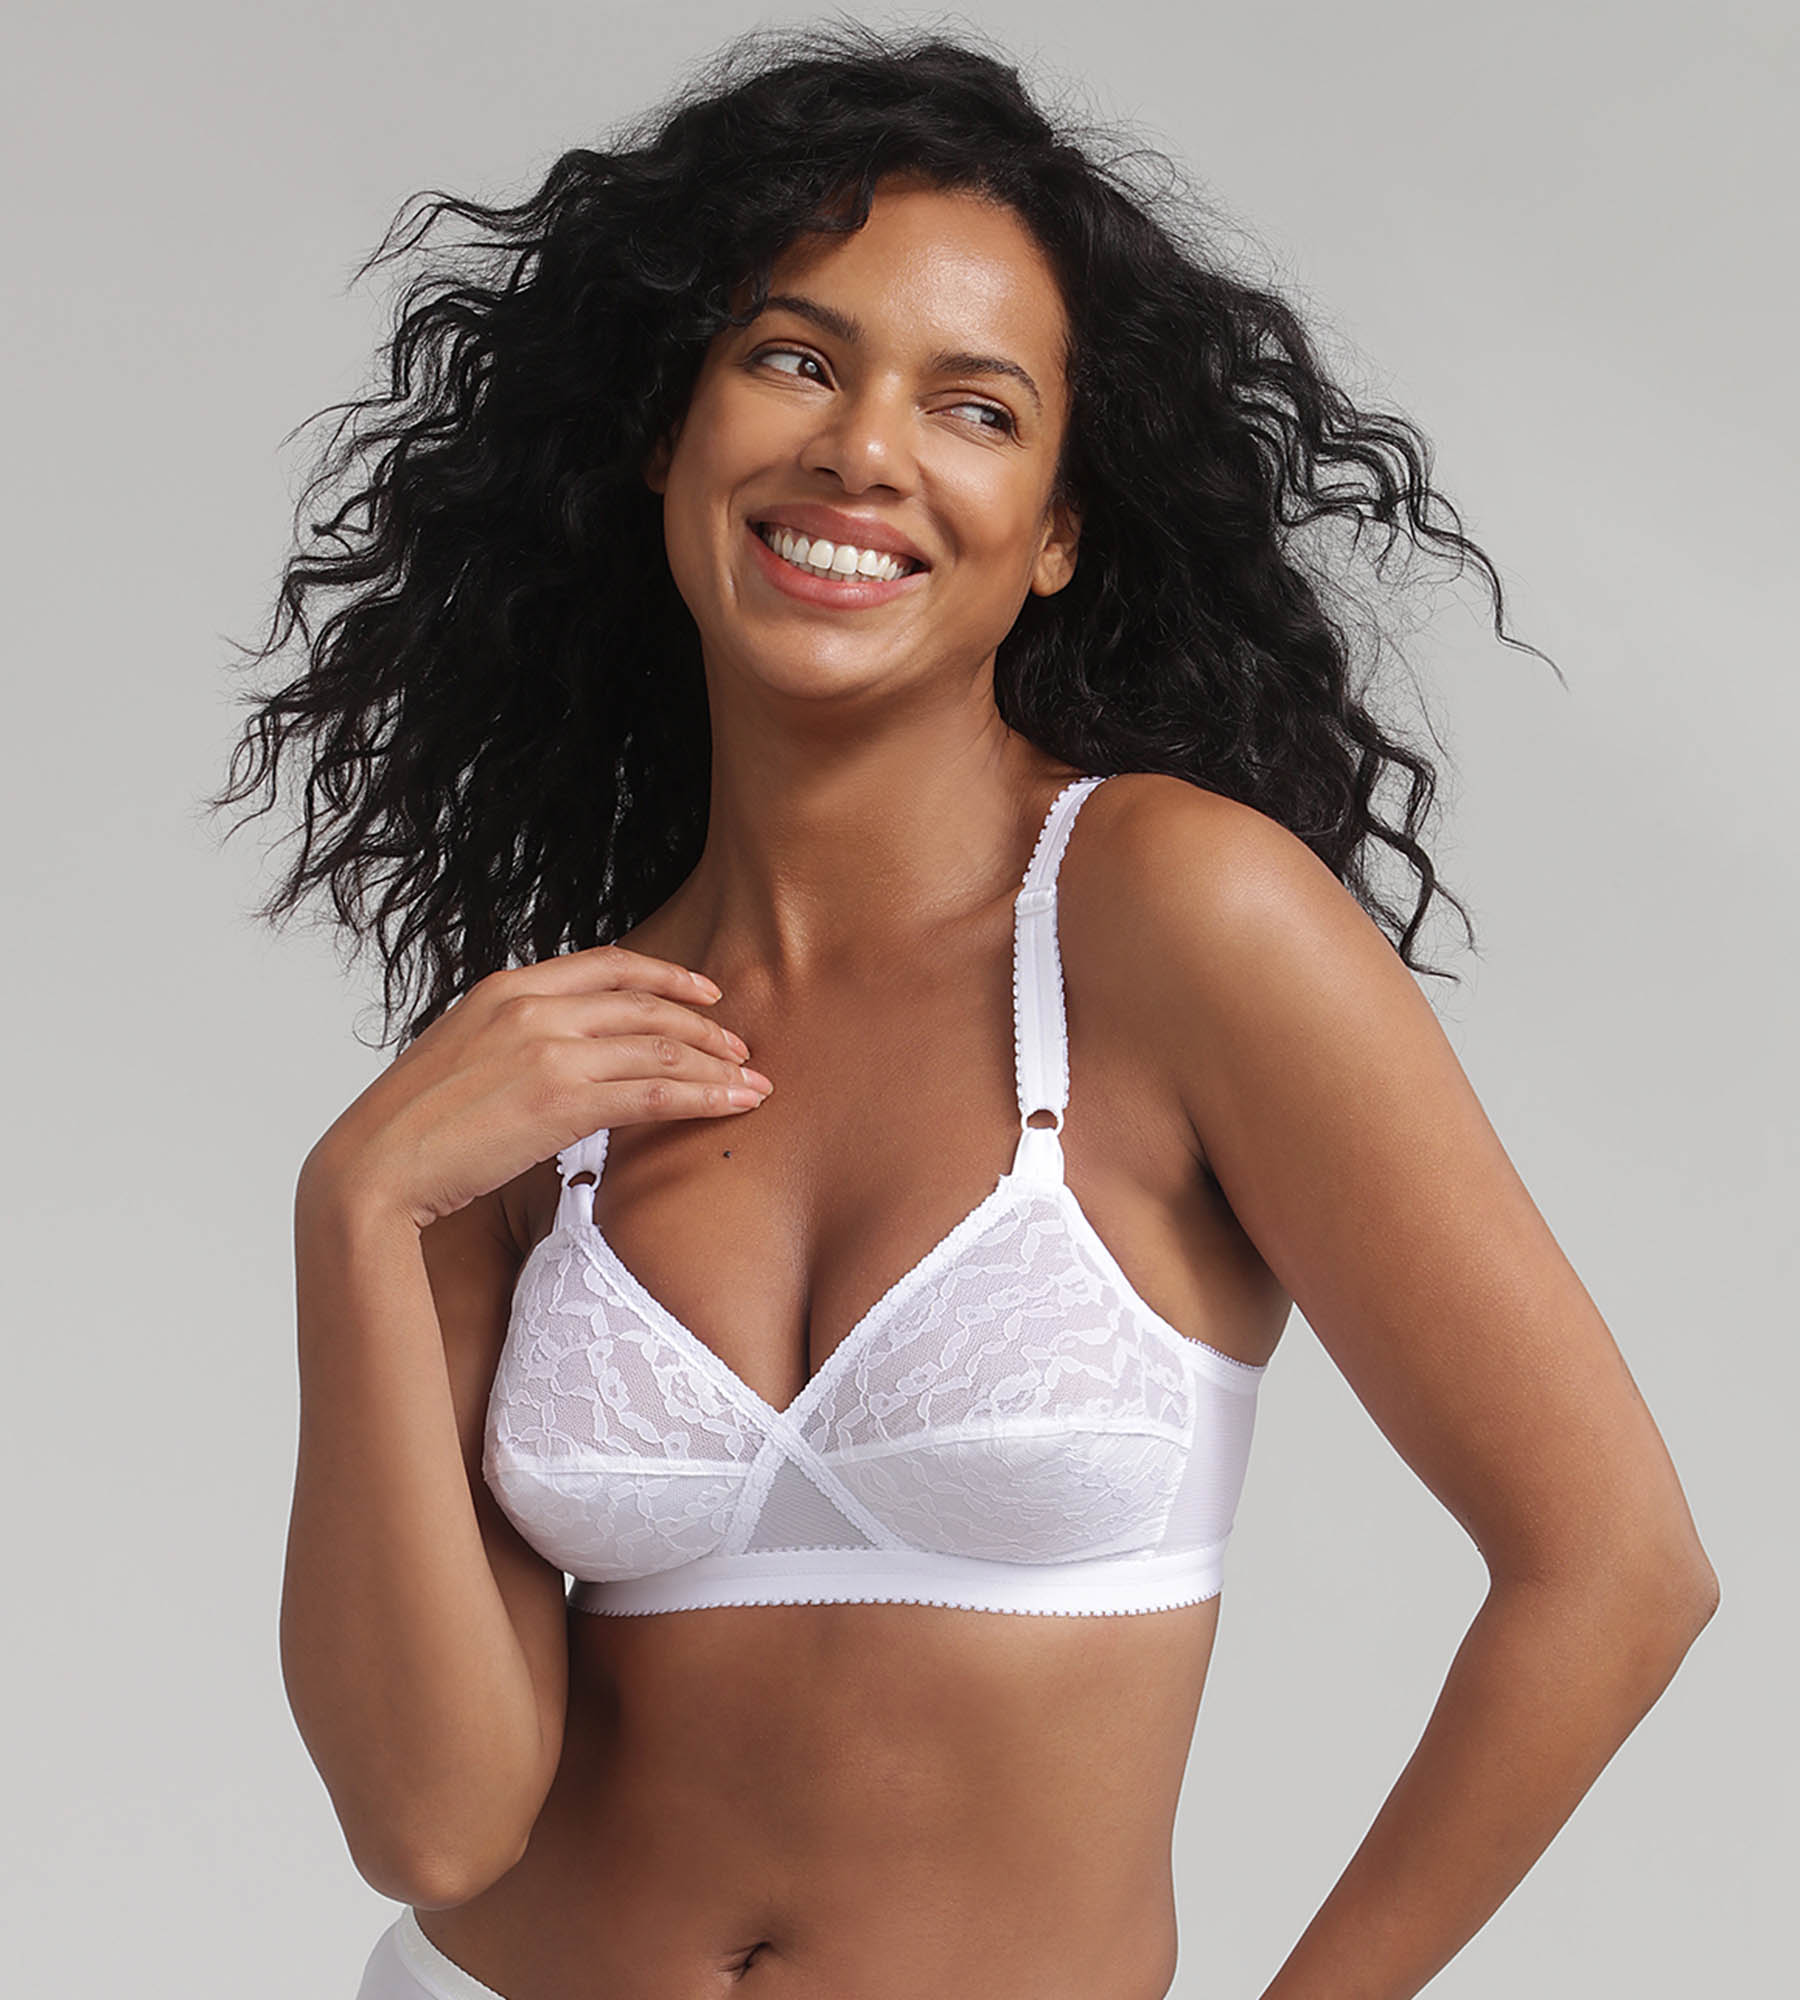 Pack of 2 non wired bras - Classic Cotton Support